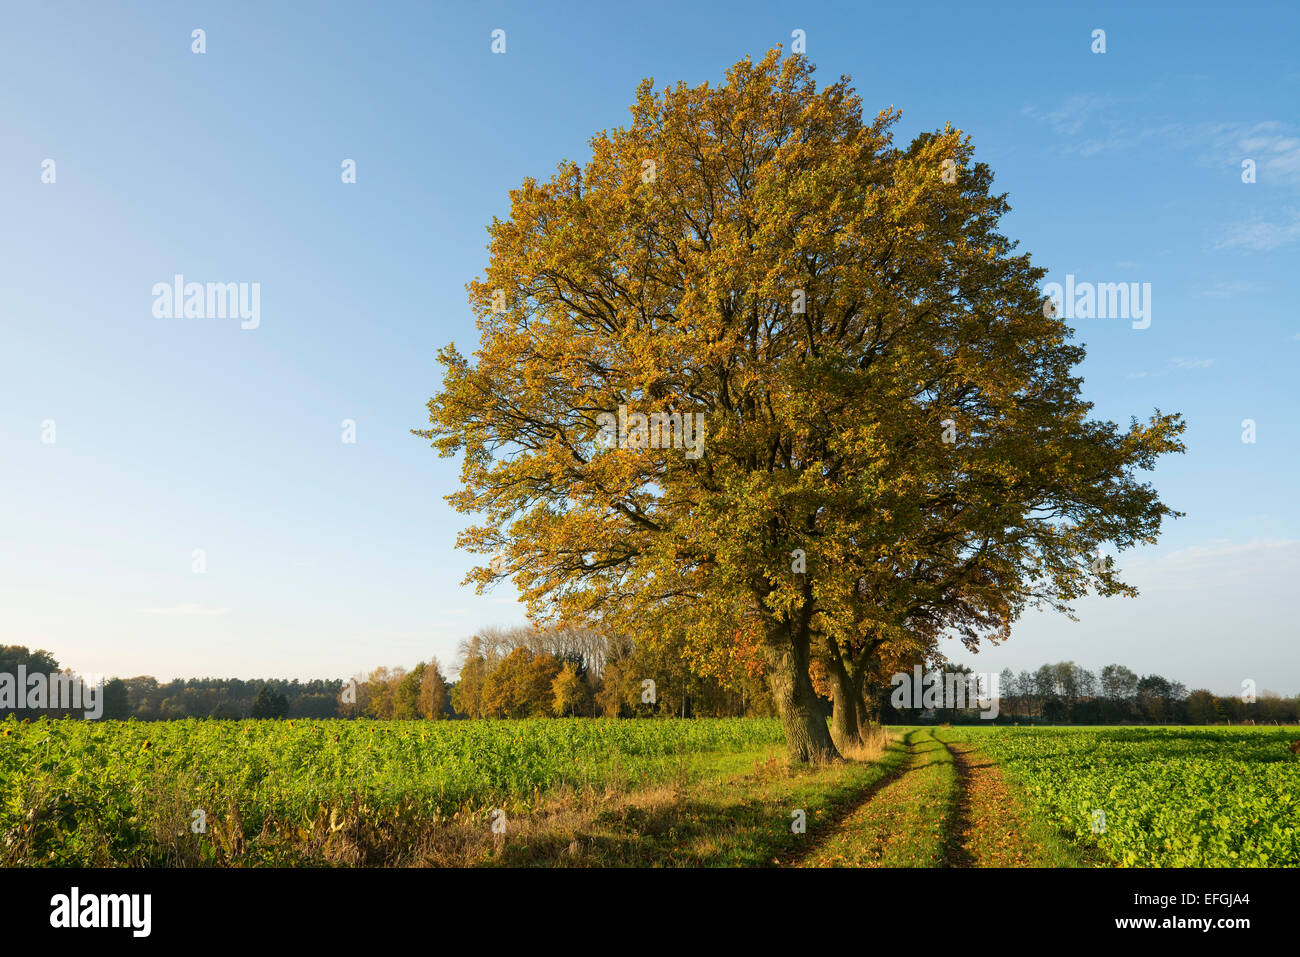 Pedunculate Oaks (Quercus robur) at a dirt road in autumn, Lower Saxony, Germany Stock Photo